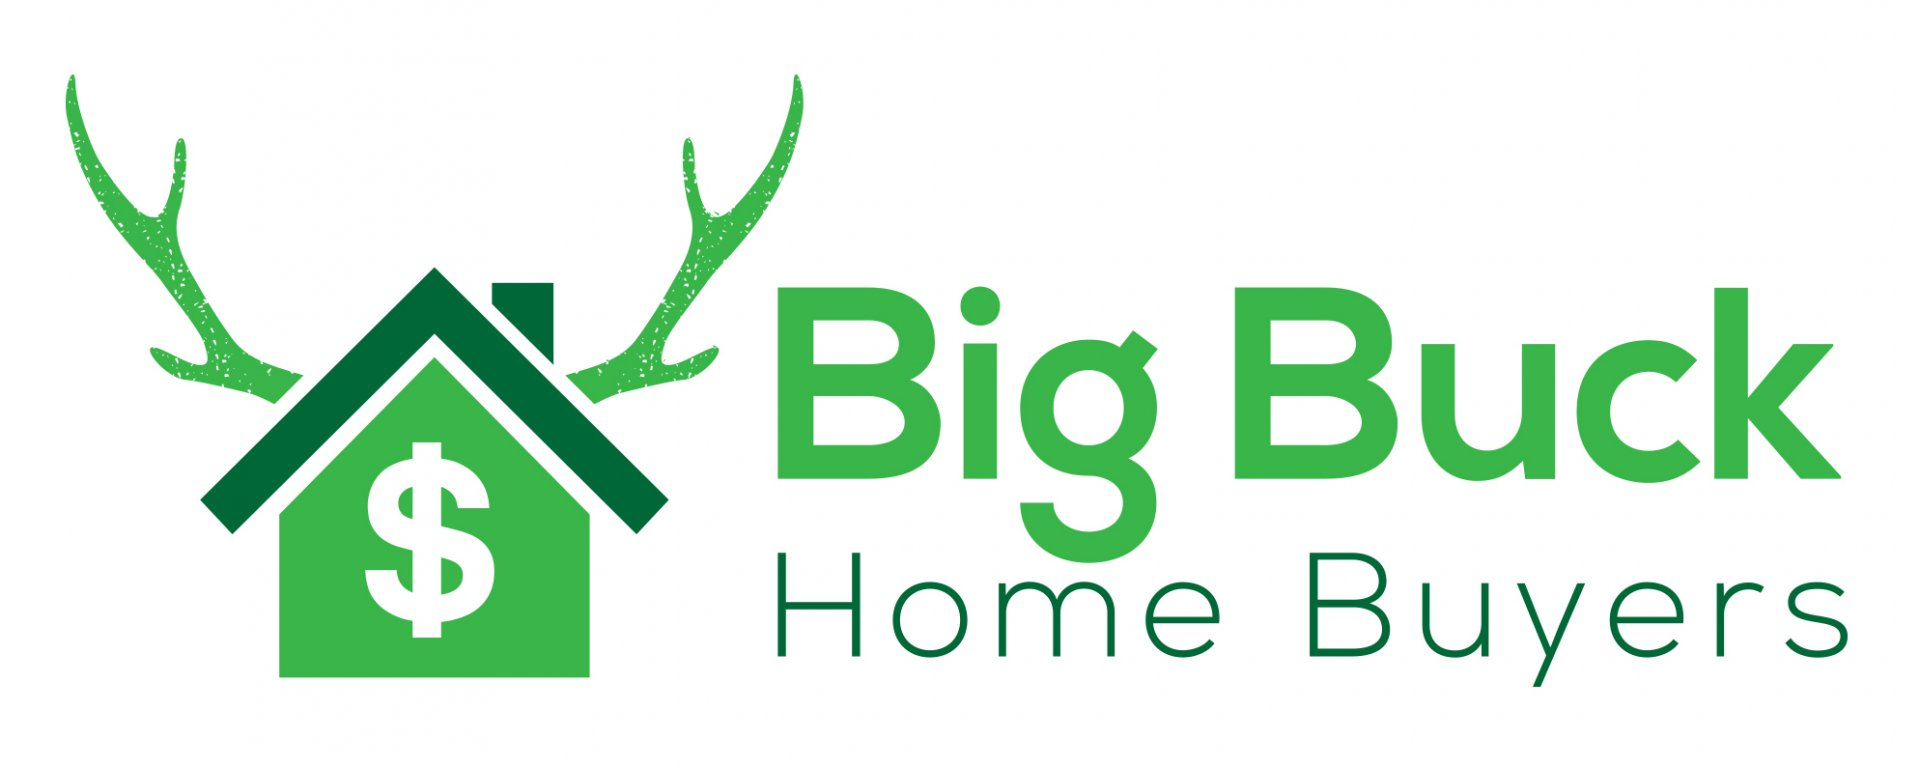 Big Buck Home Buyers Expands Into All Texas Markets Enabling Homeowners To Sell Their Homes Fast and Efficiently